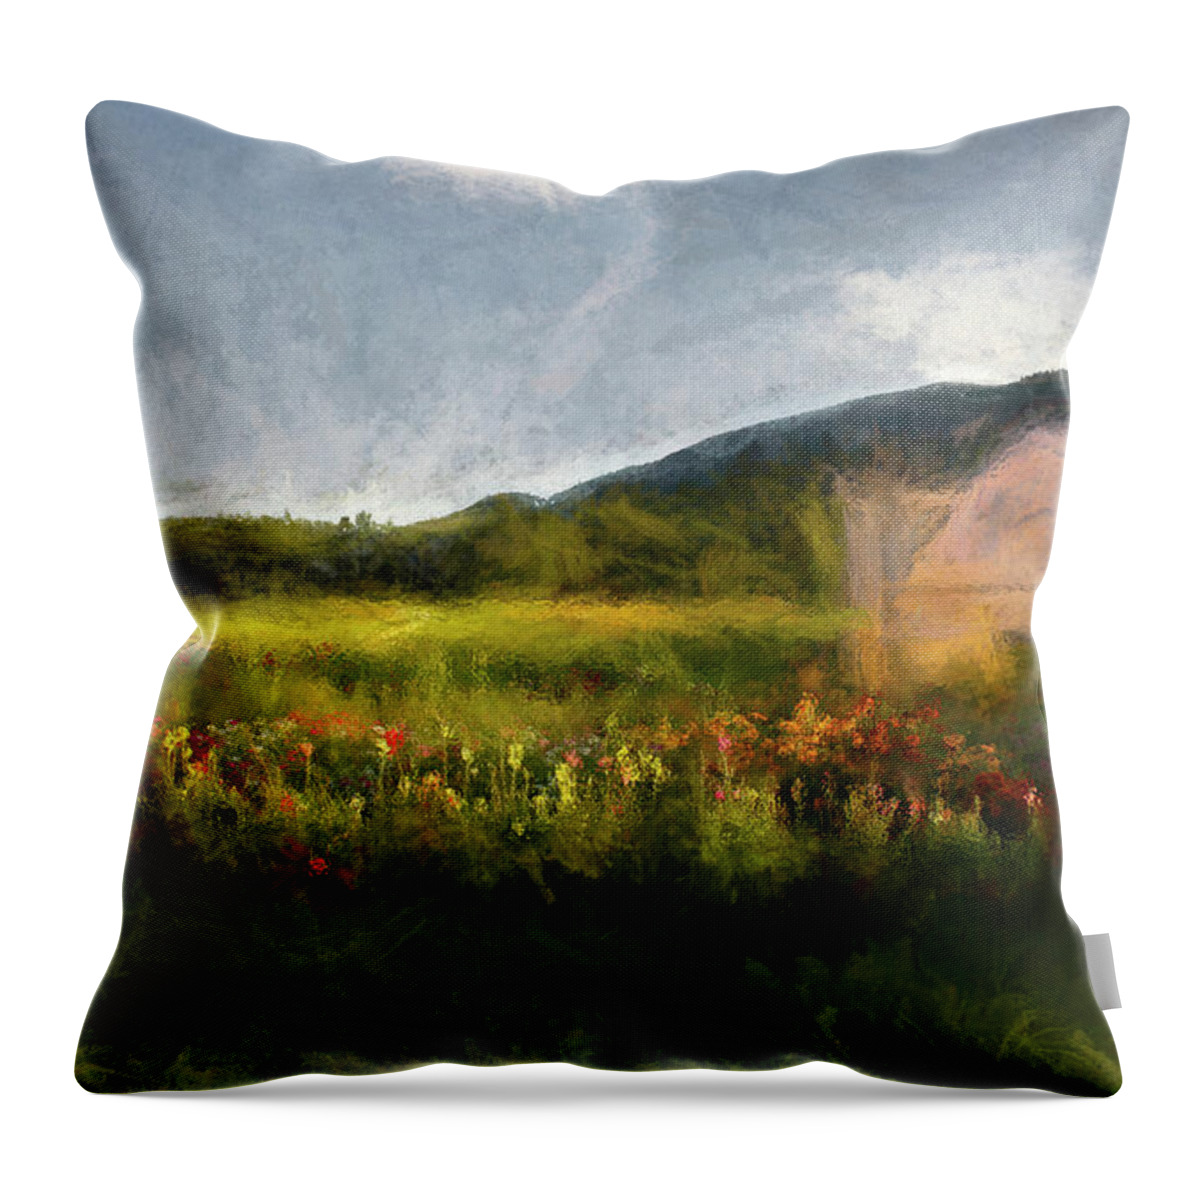 Last Throw Pillow featuring the photograph Last Light on the Greenhouse by Wayne King